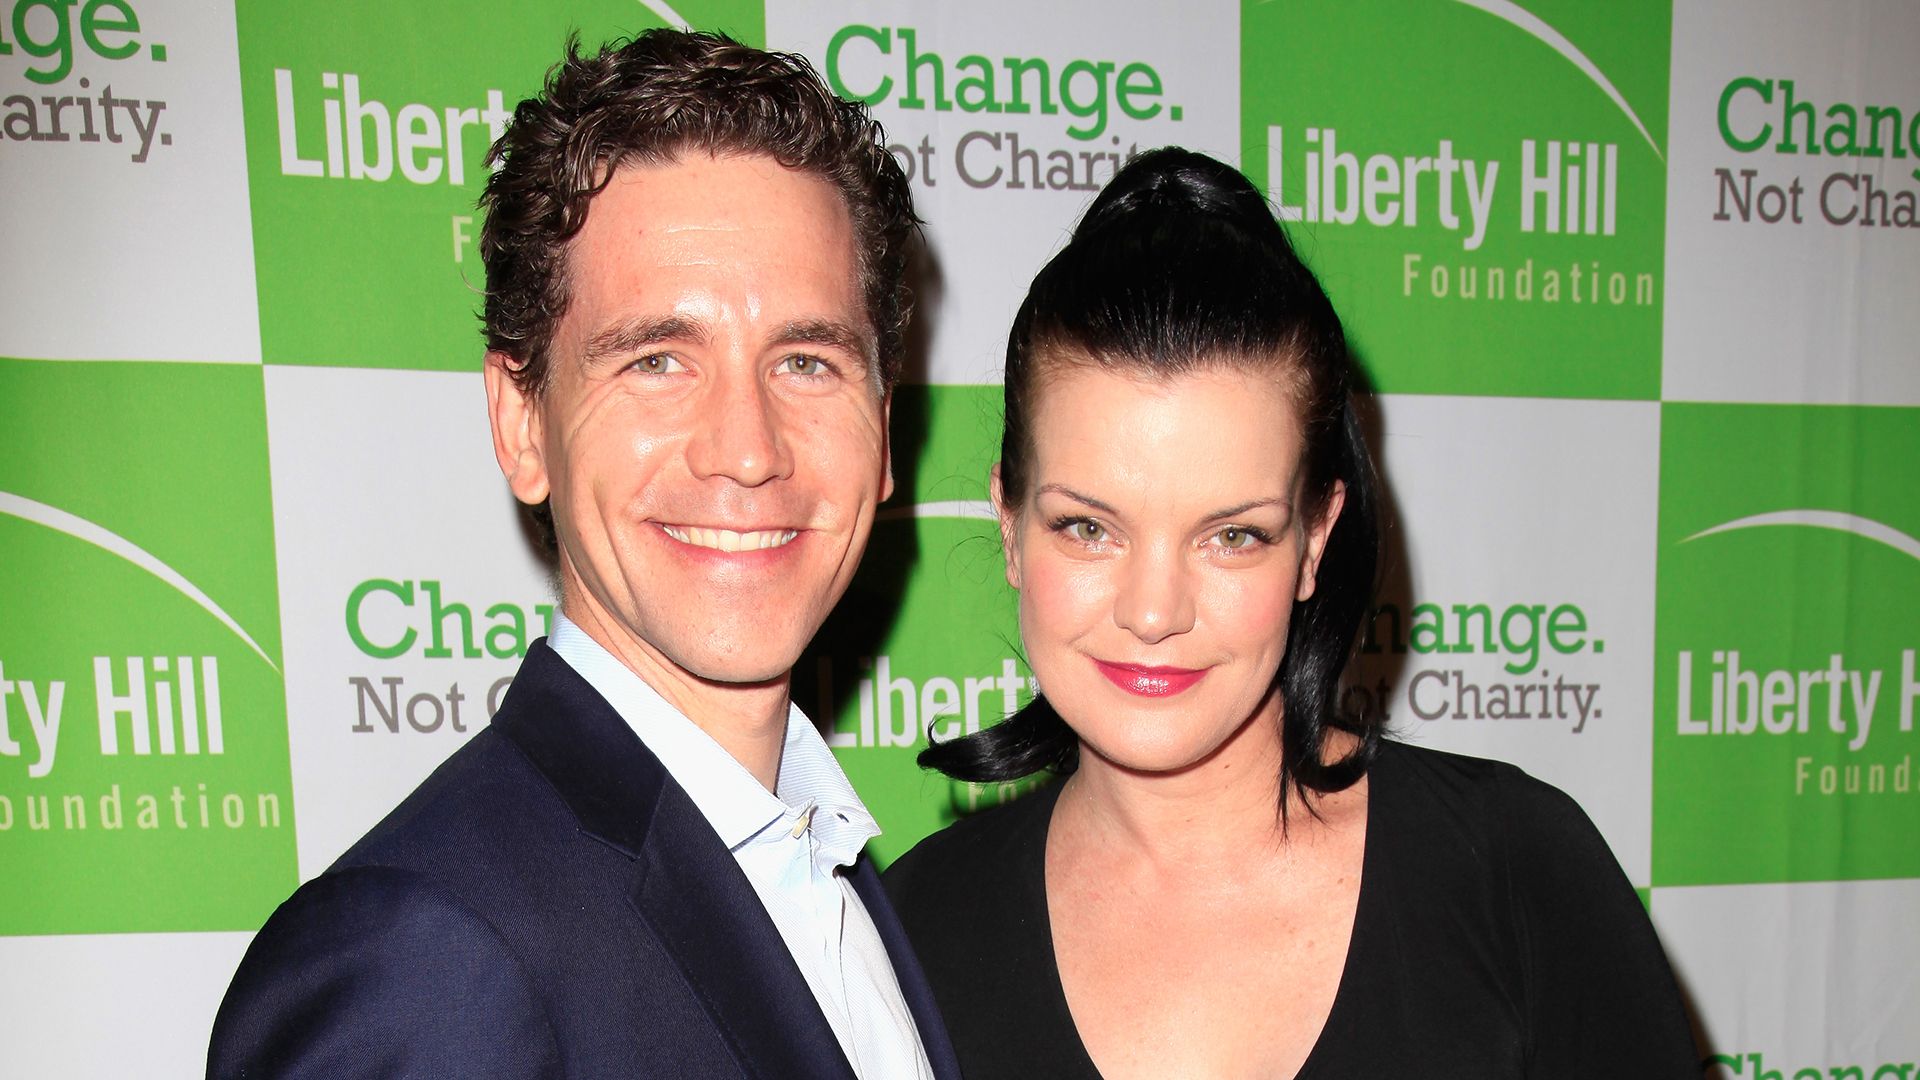 Actors Brian Dietzen and Pauley Perrette at Liberty Hill's Upton Sinclair Awards Dinner at The Beverly Hilton Hotel on April 23, 2013